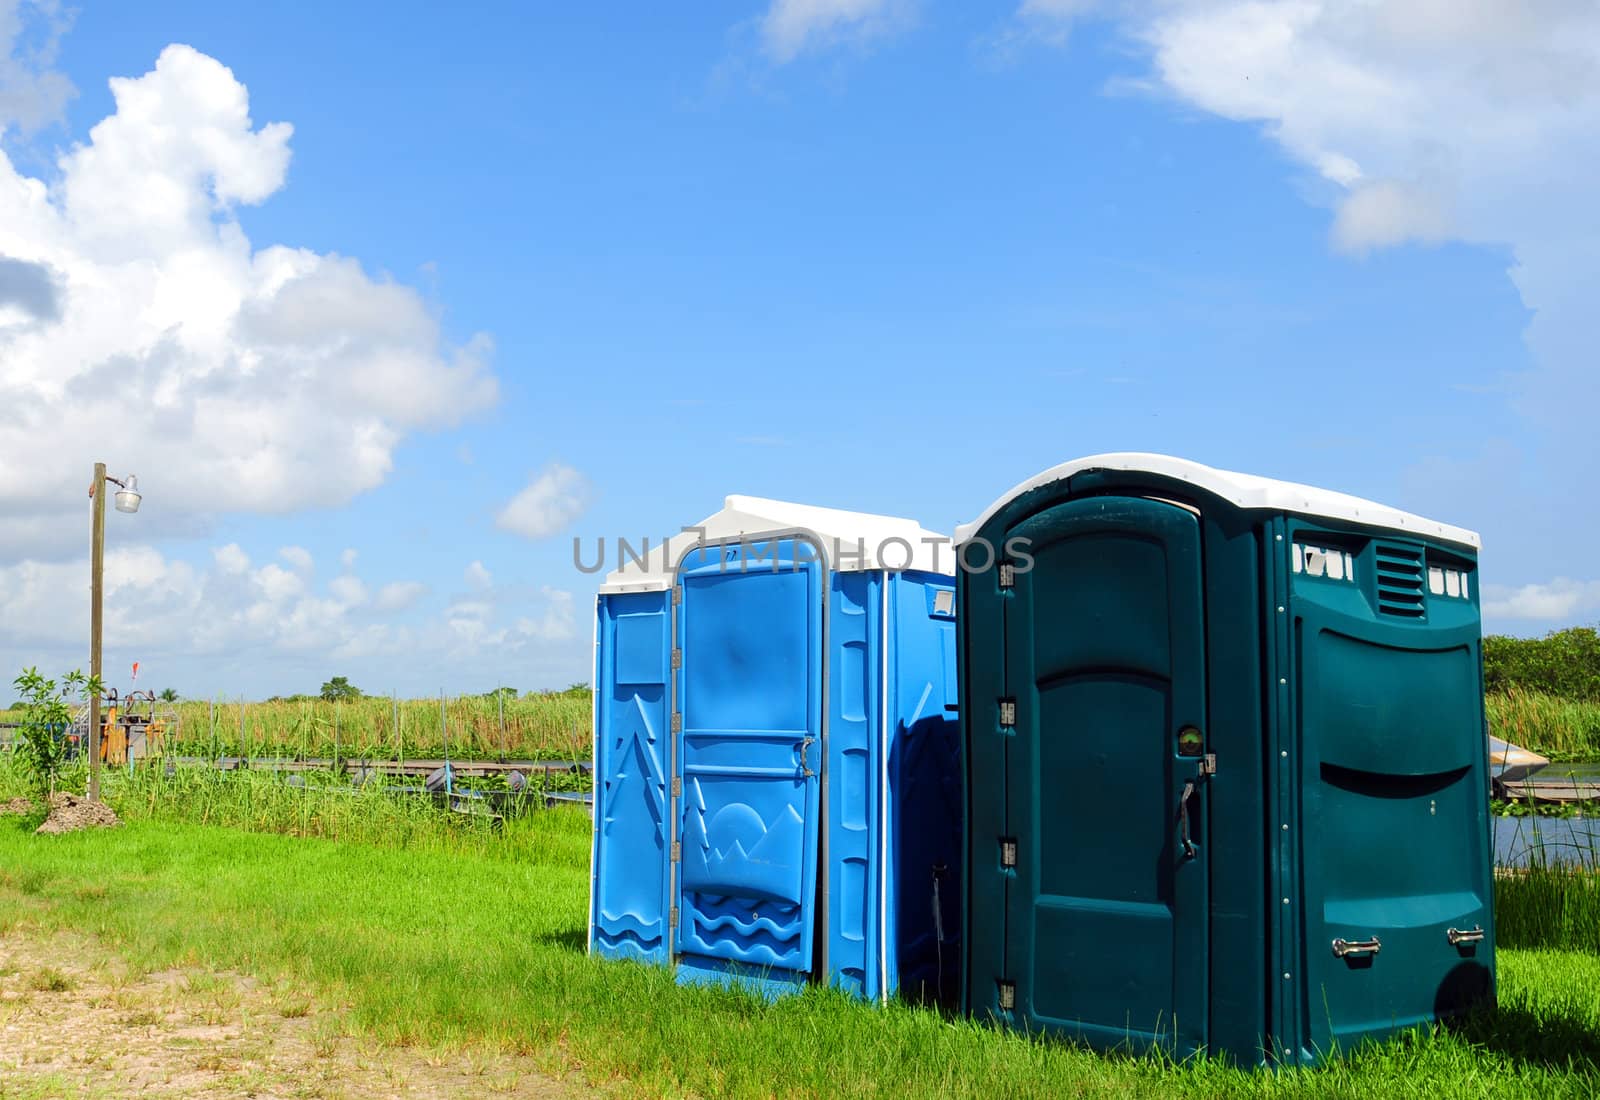 Outhouses by ftlaudgirl